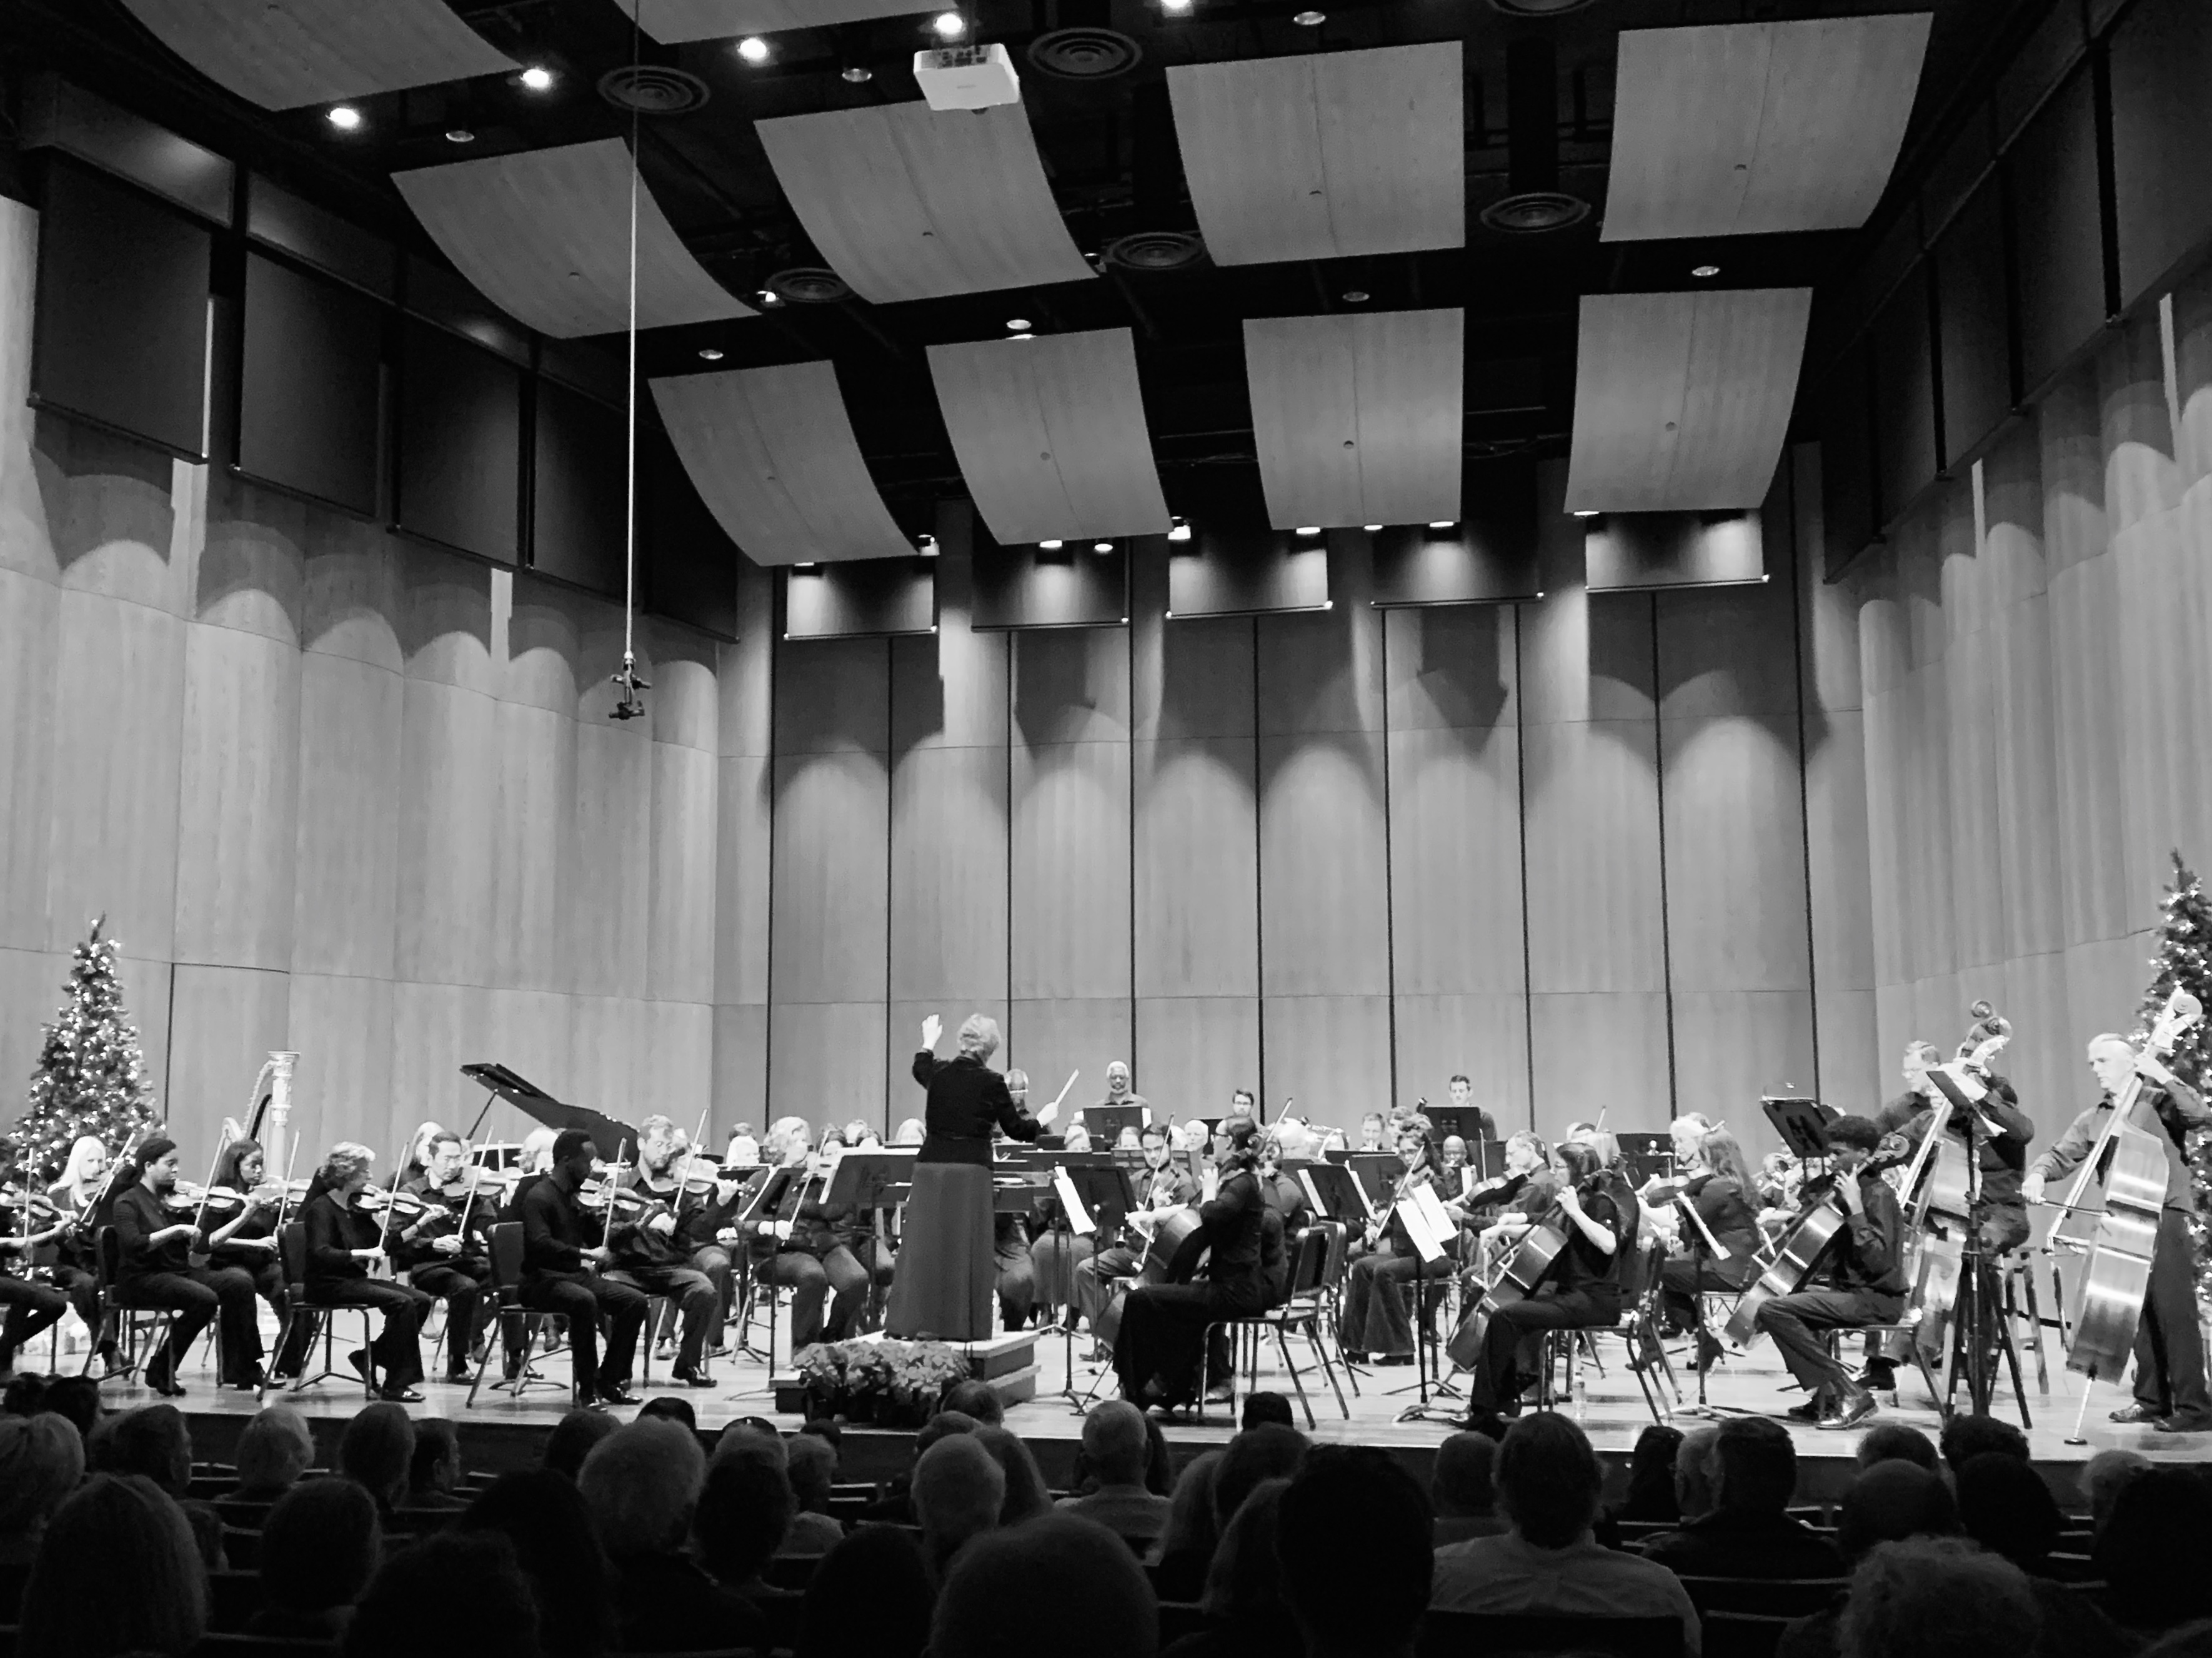 The Jacksonville Civic Orchestra 2019 'Winter Dreams' Concert presented by Smith Hulsey & Busey